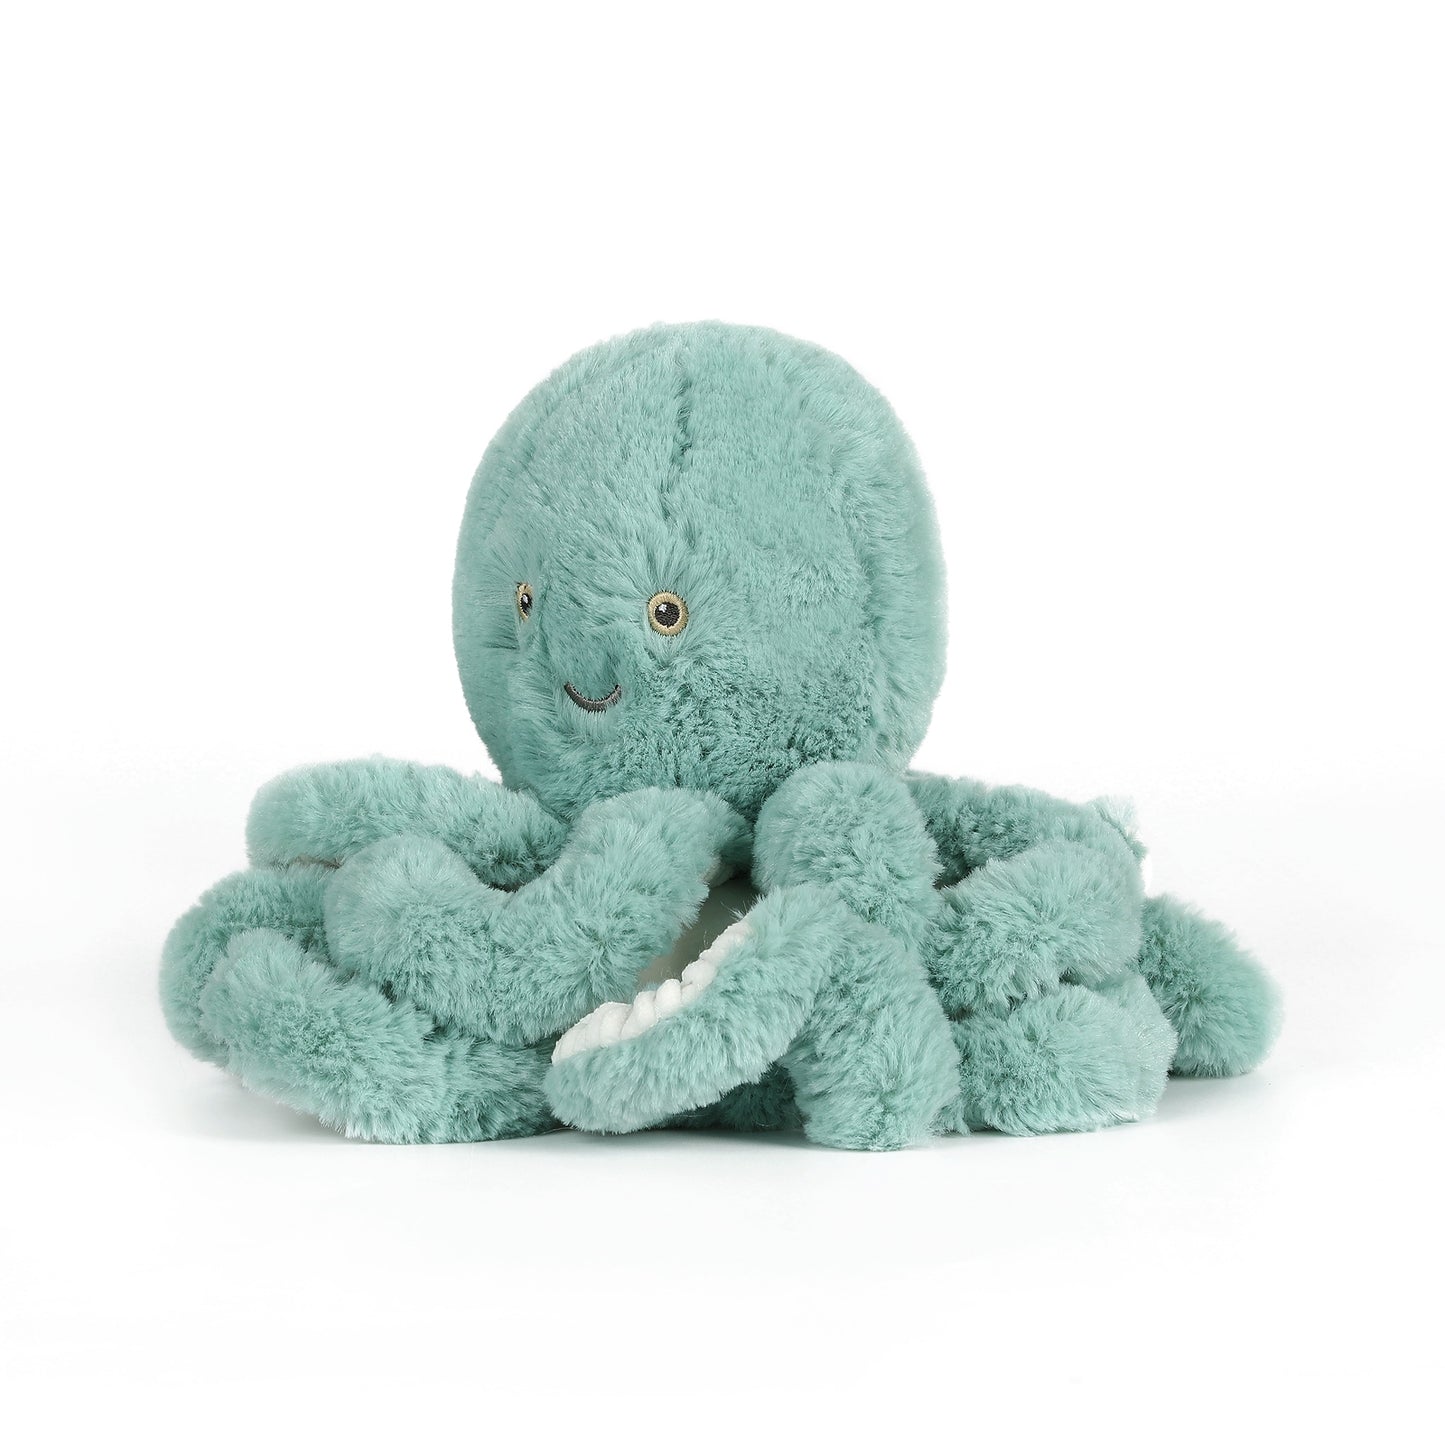 Designed by OB in Australia, these sea creature toys are a great snuggly friend for your little ones and their adventures.